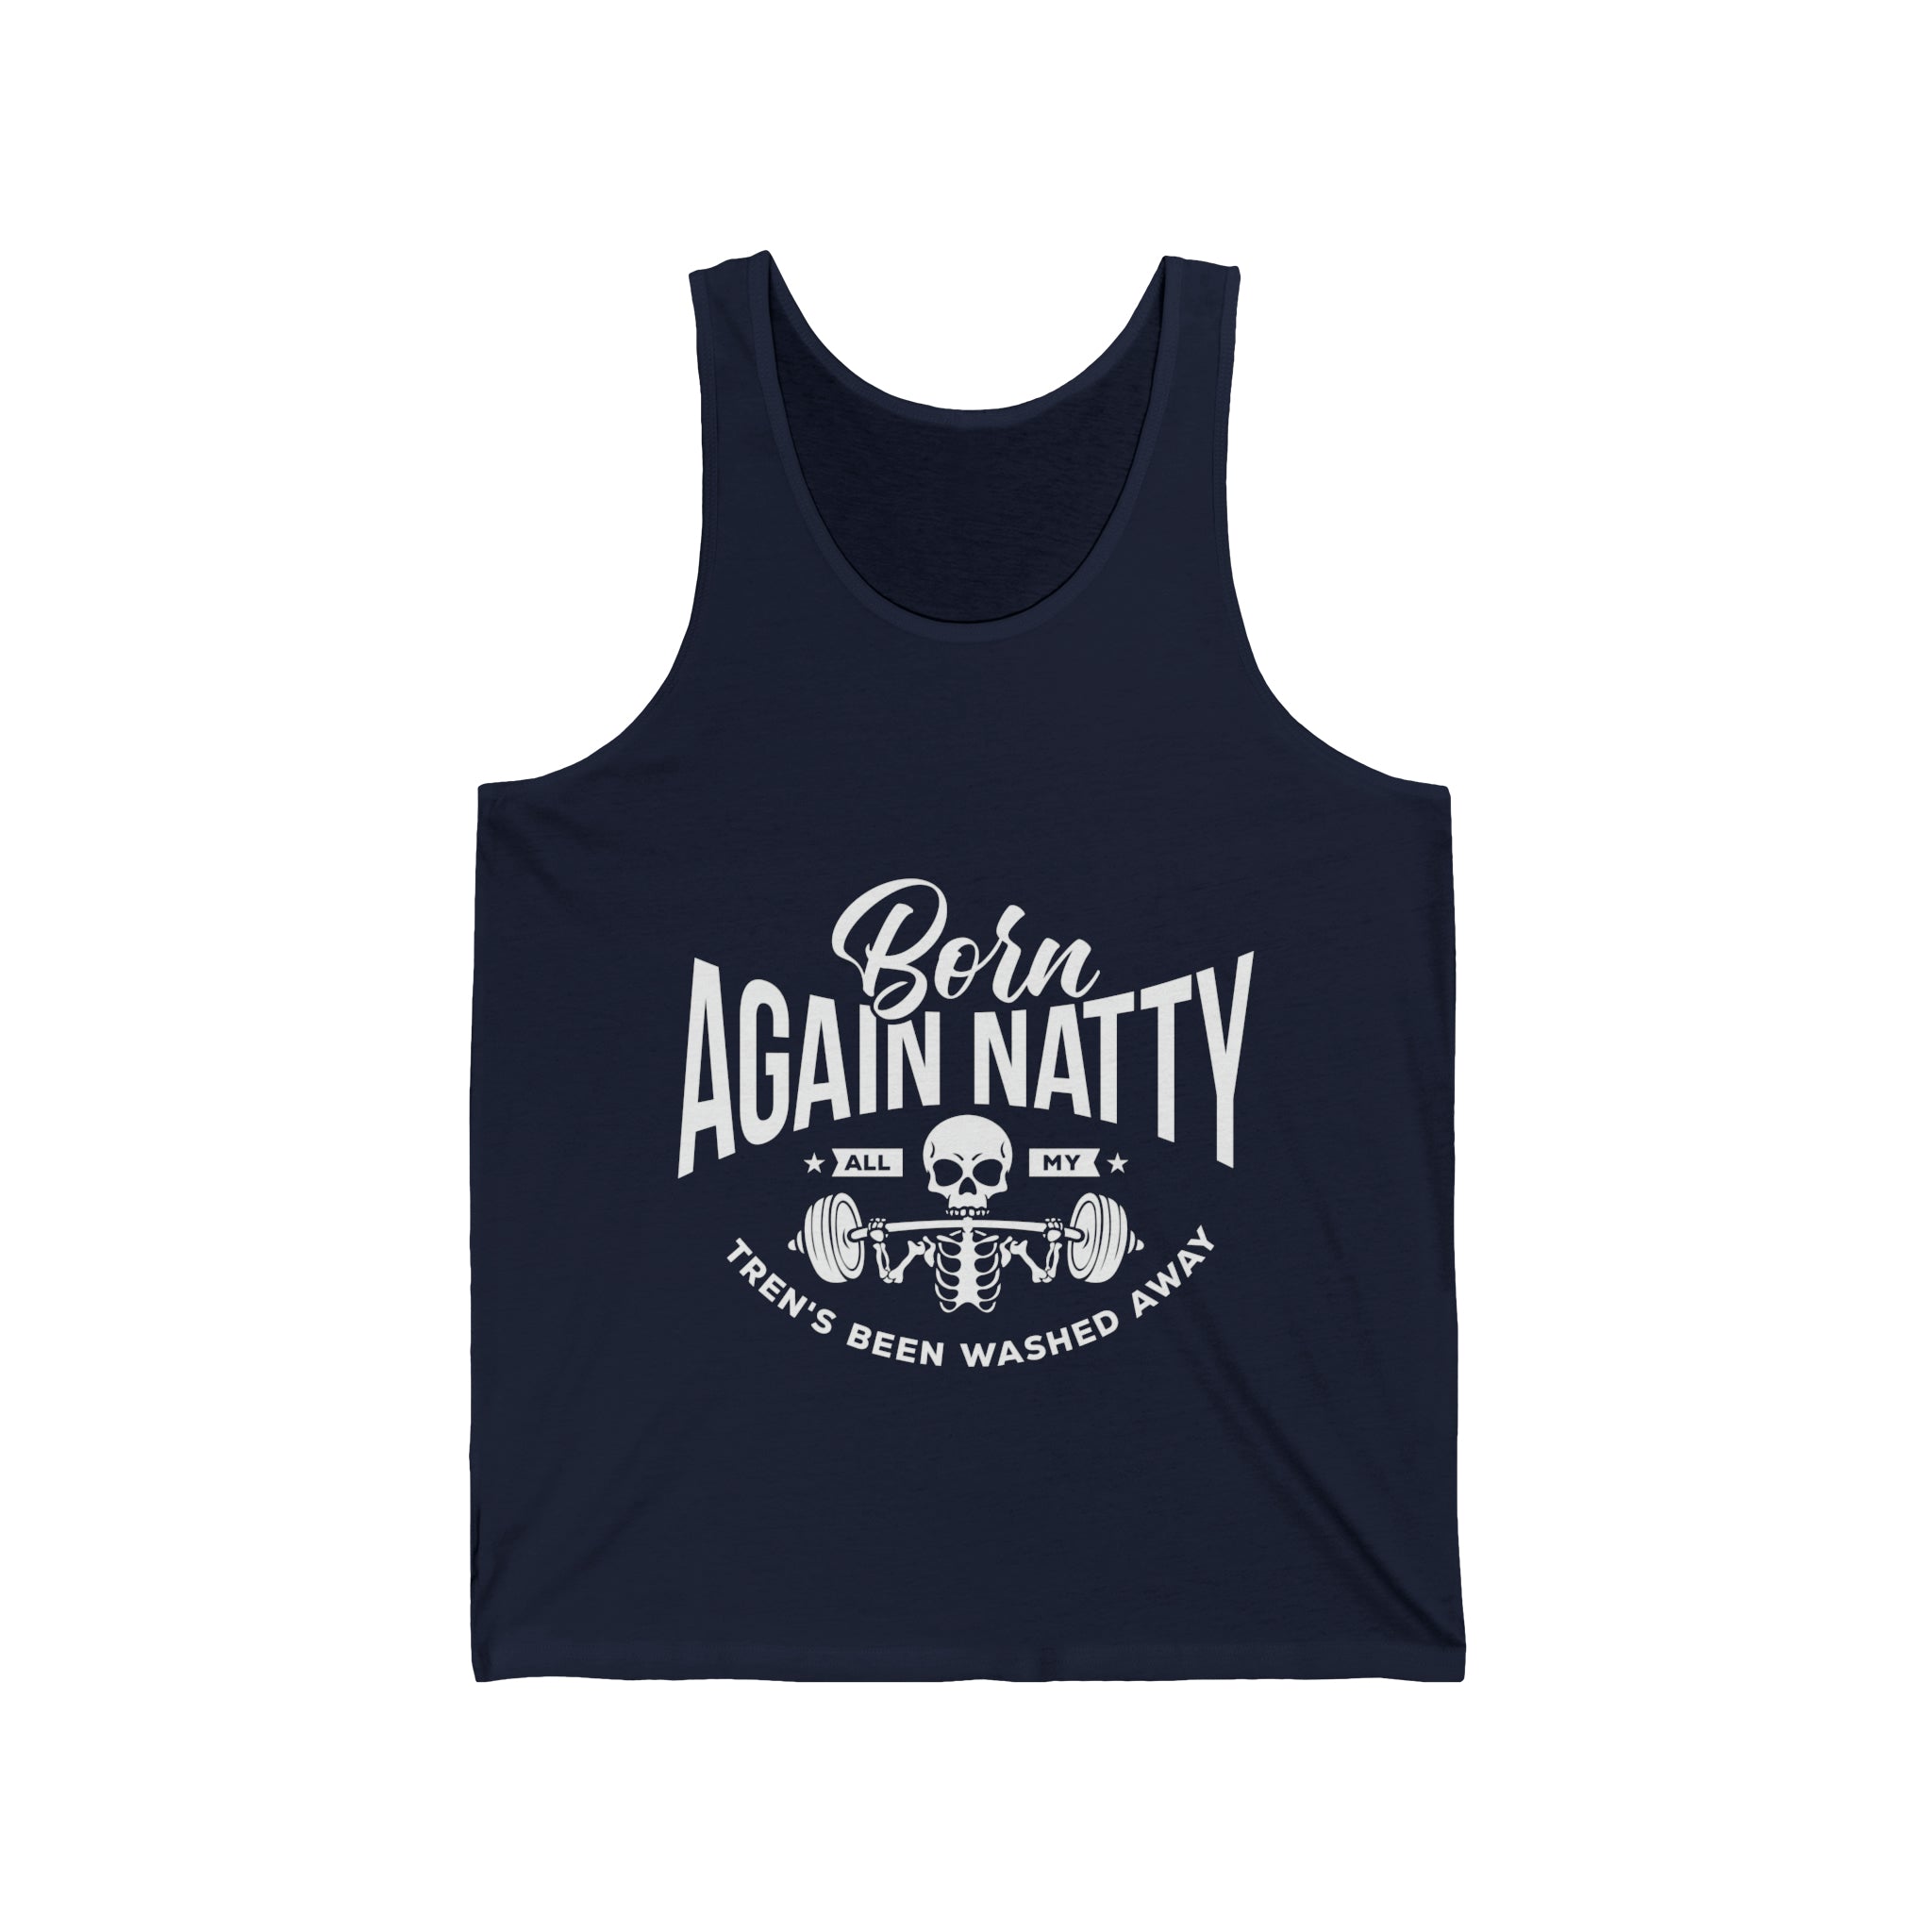 Born Again Natty - All My Tren's Been Washed Away  Unisex Jersey Tank